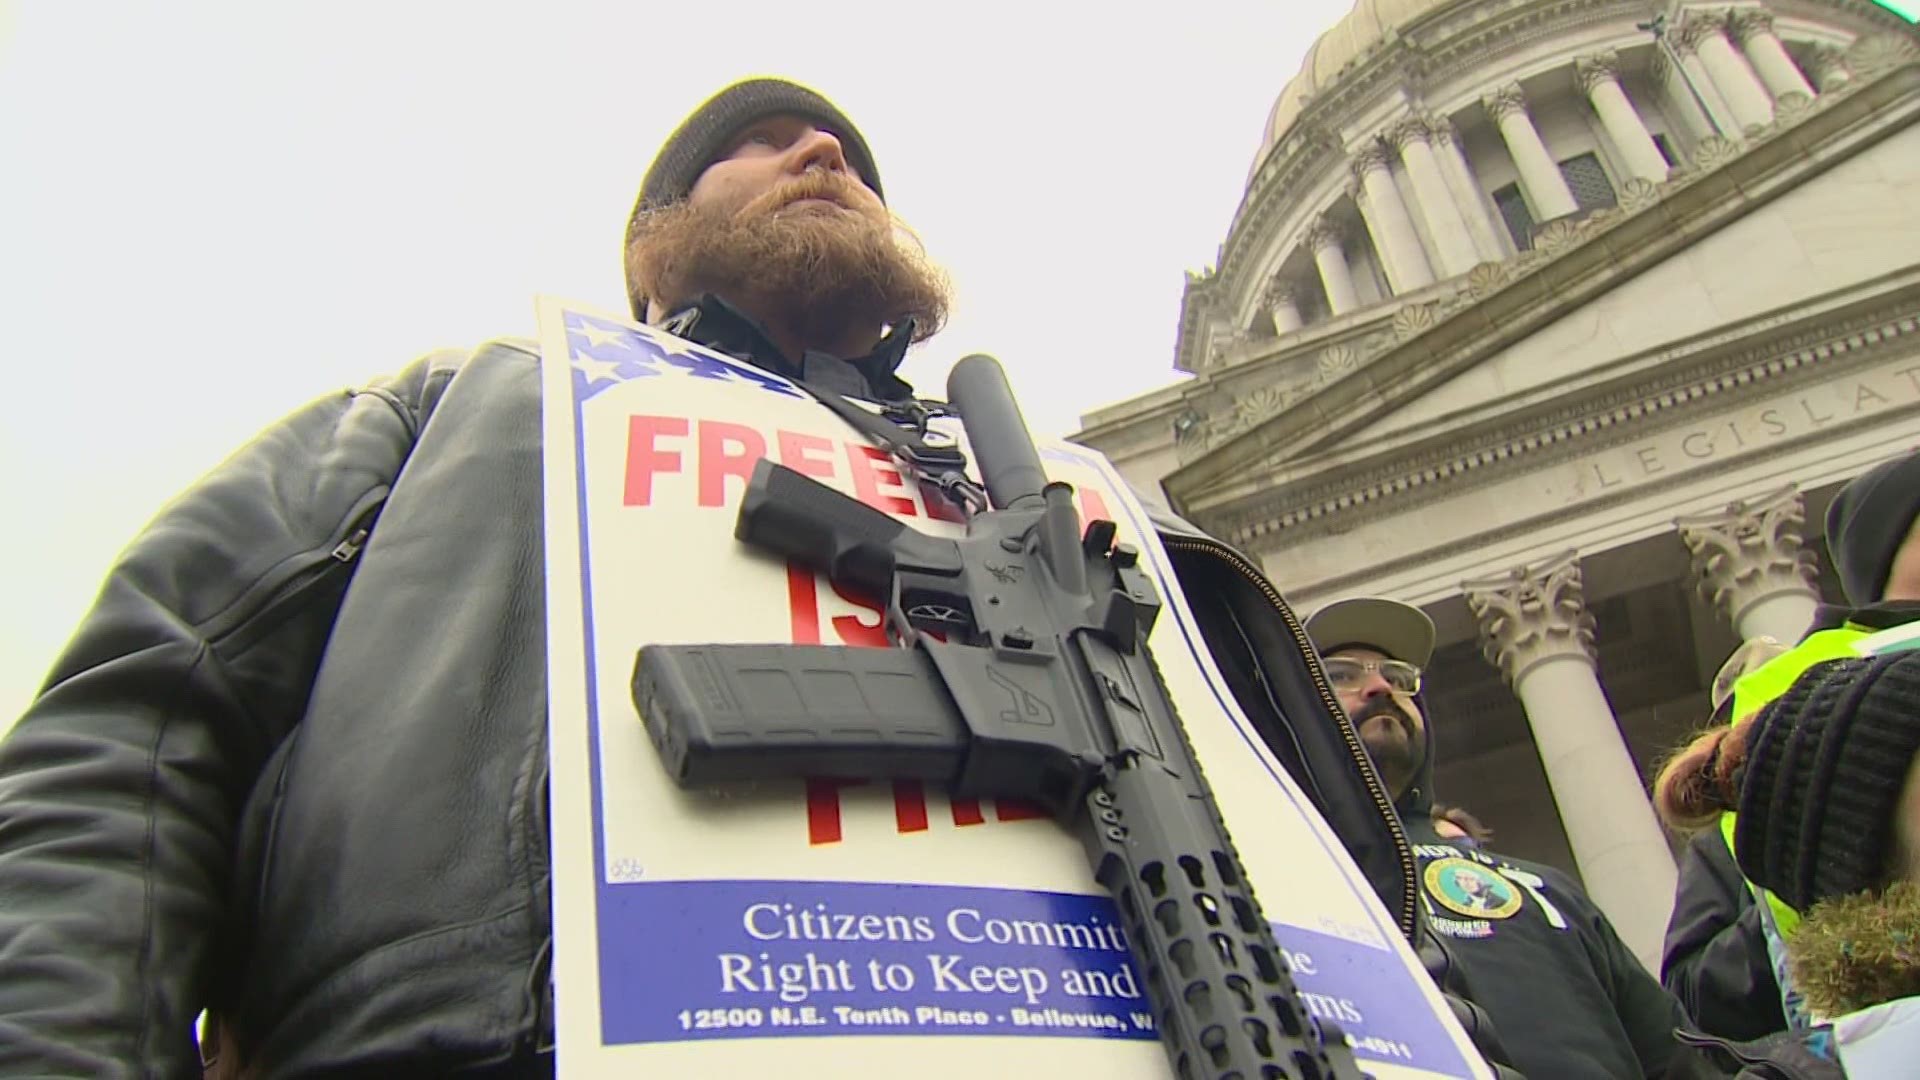 The law prohibits the open carry of firearms within 250 feet of permitted demonstrations and on the Capitol grounds in Olympia.